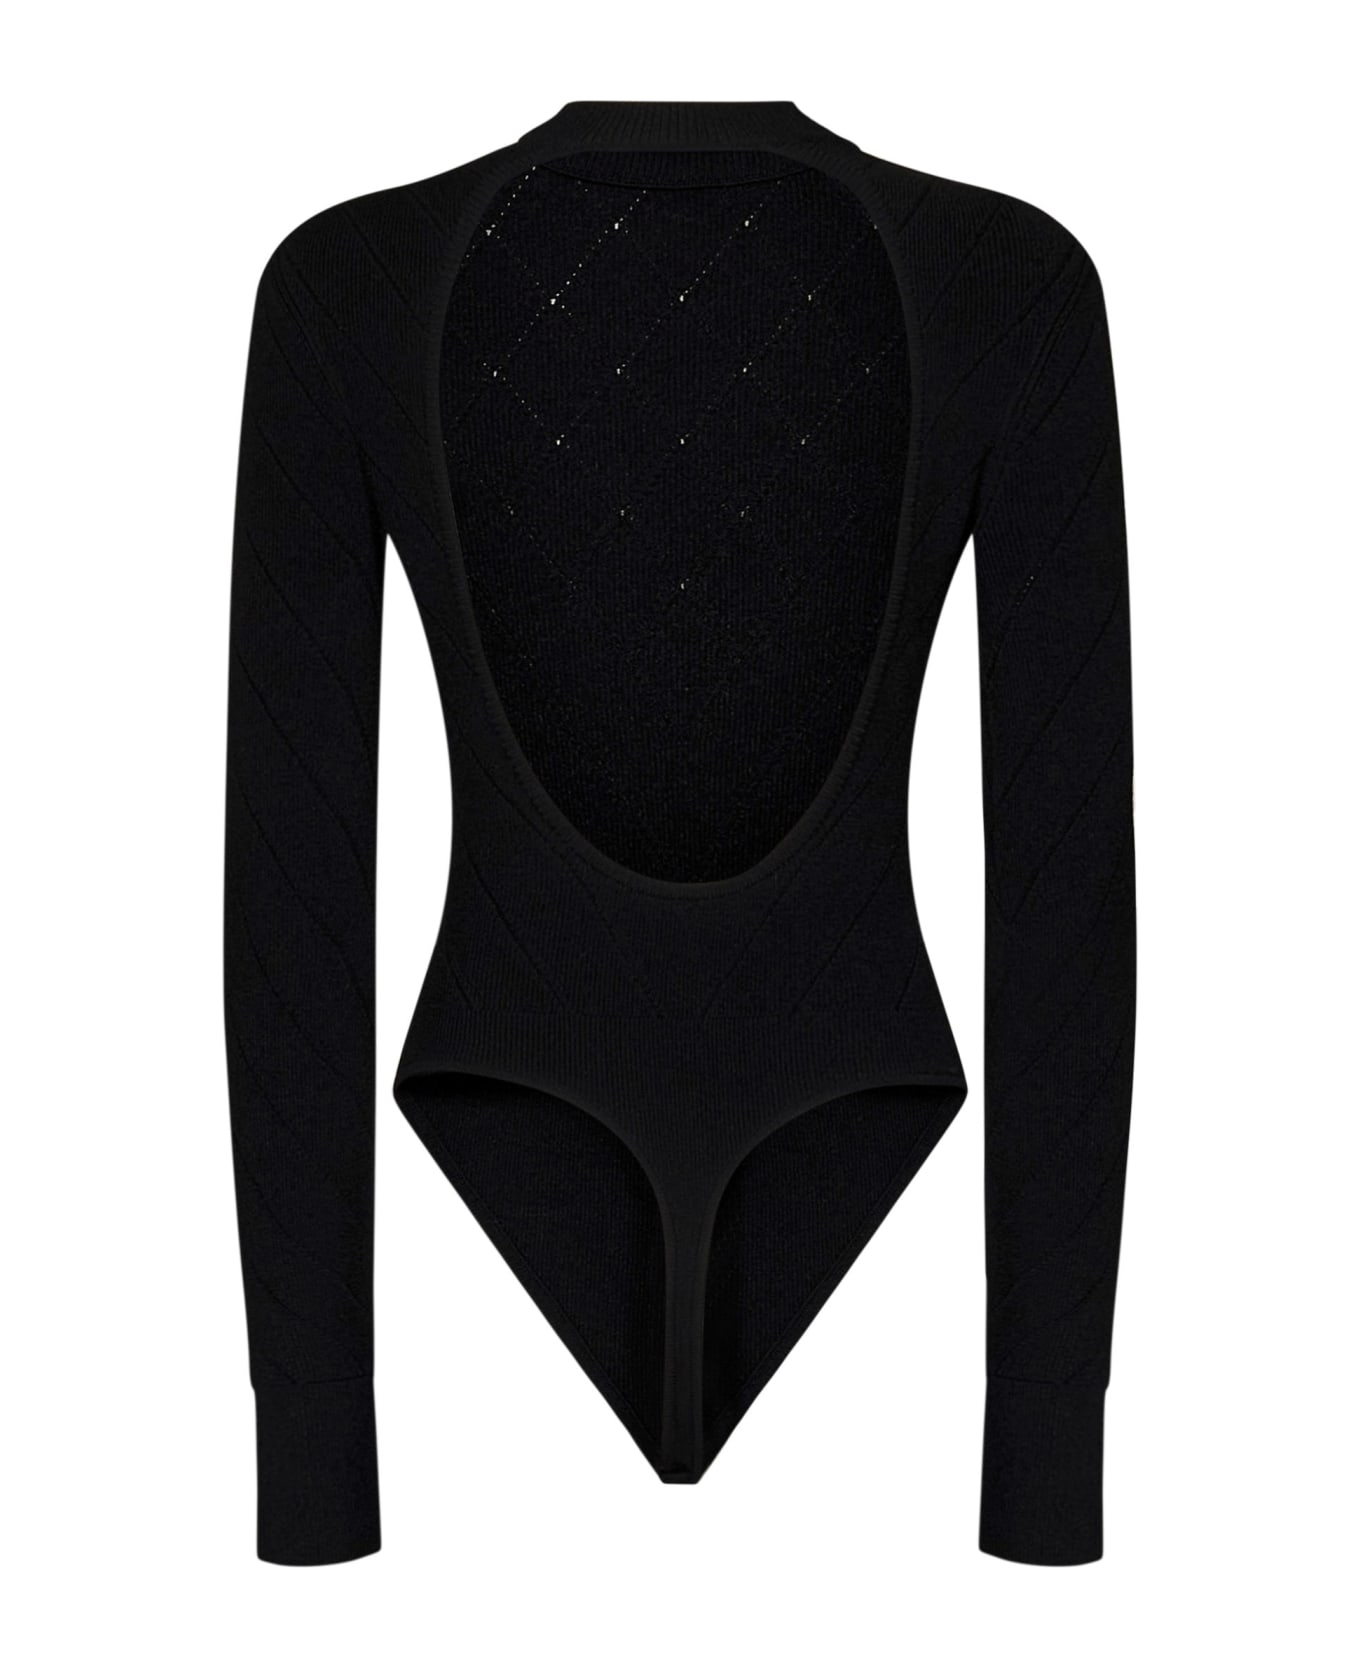 Balmain Knitted Bodysuit With Embossed Buttons - Black ボディスーツ